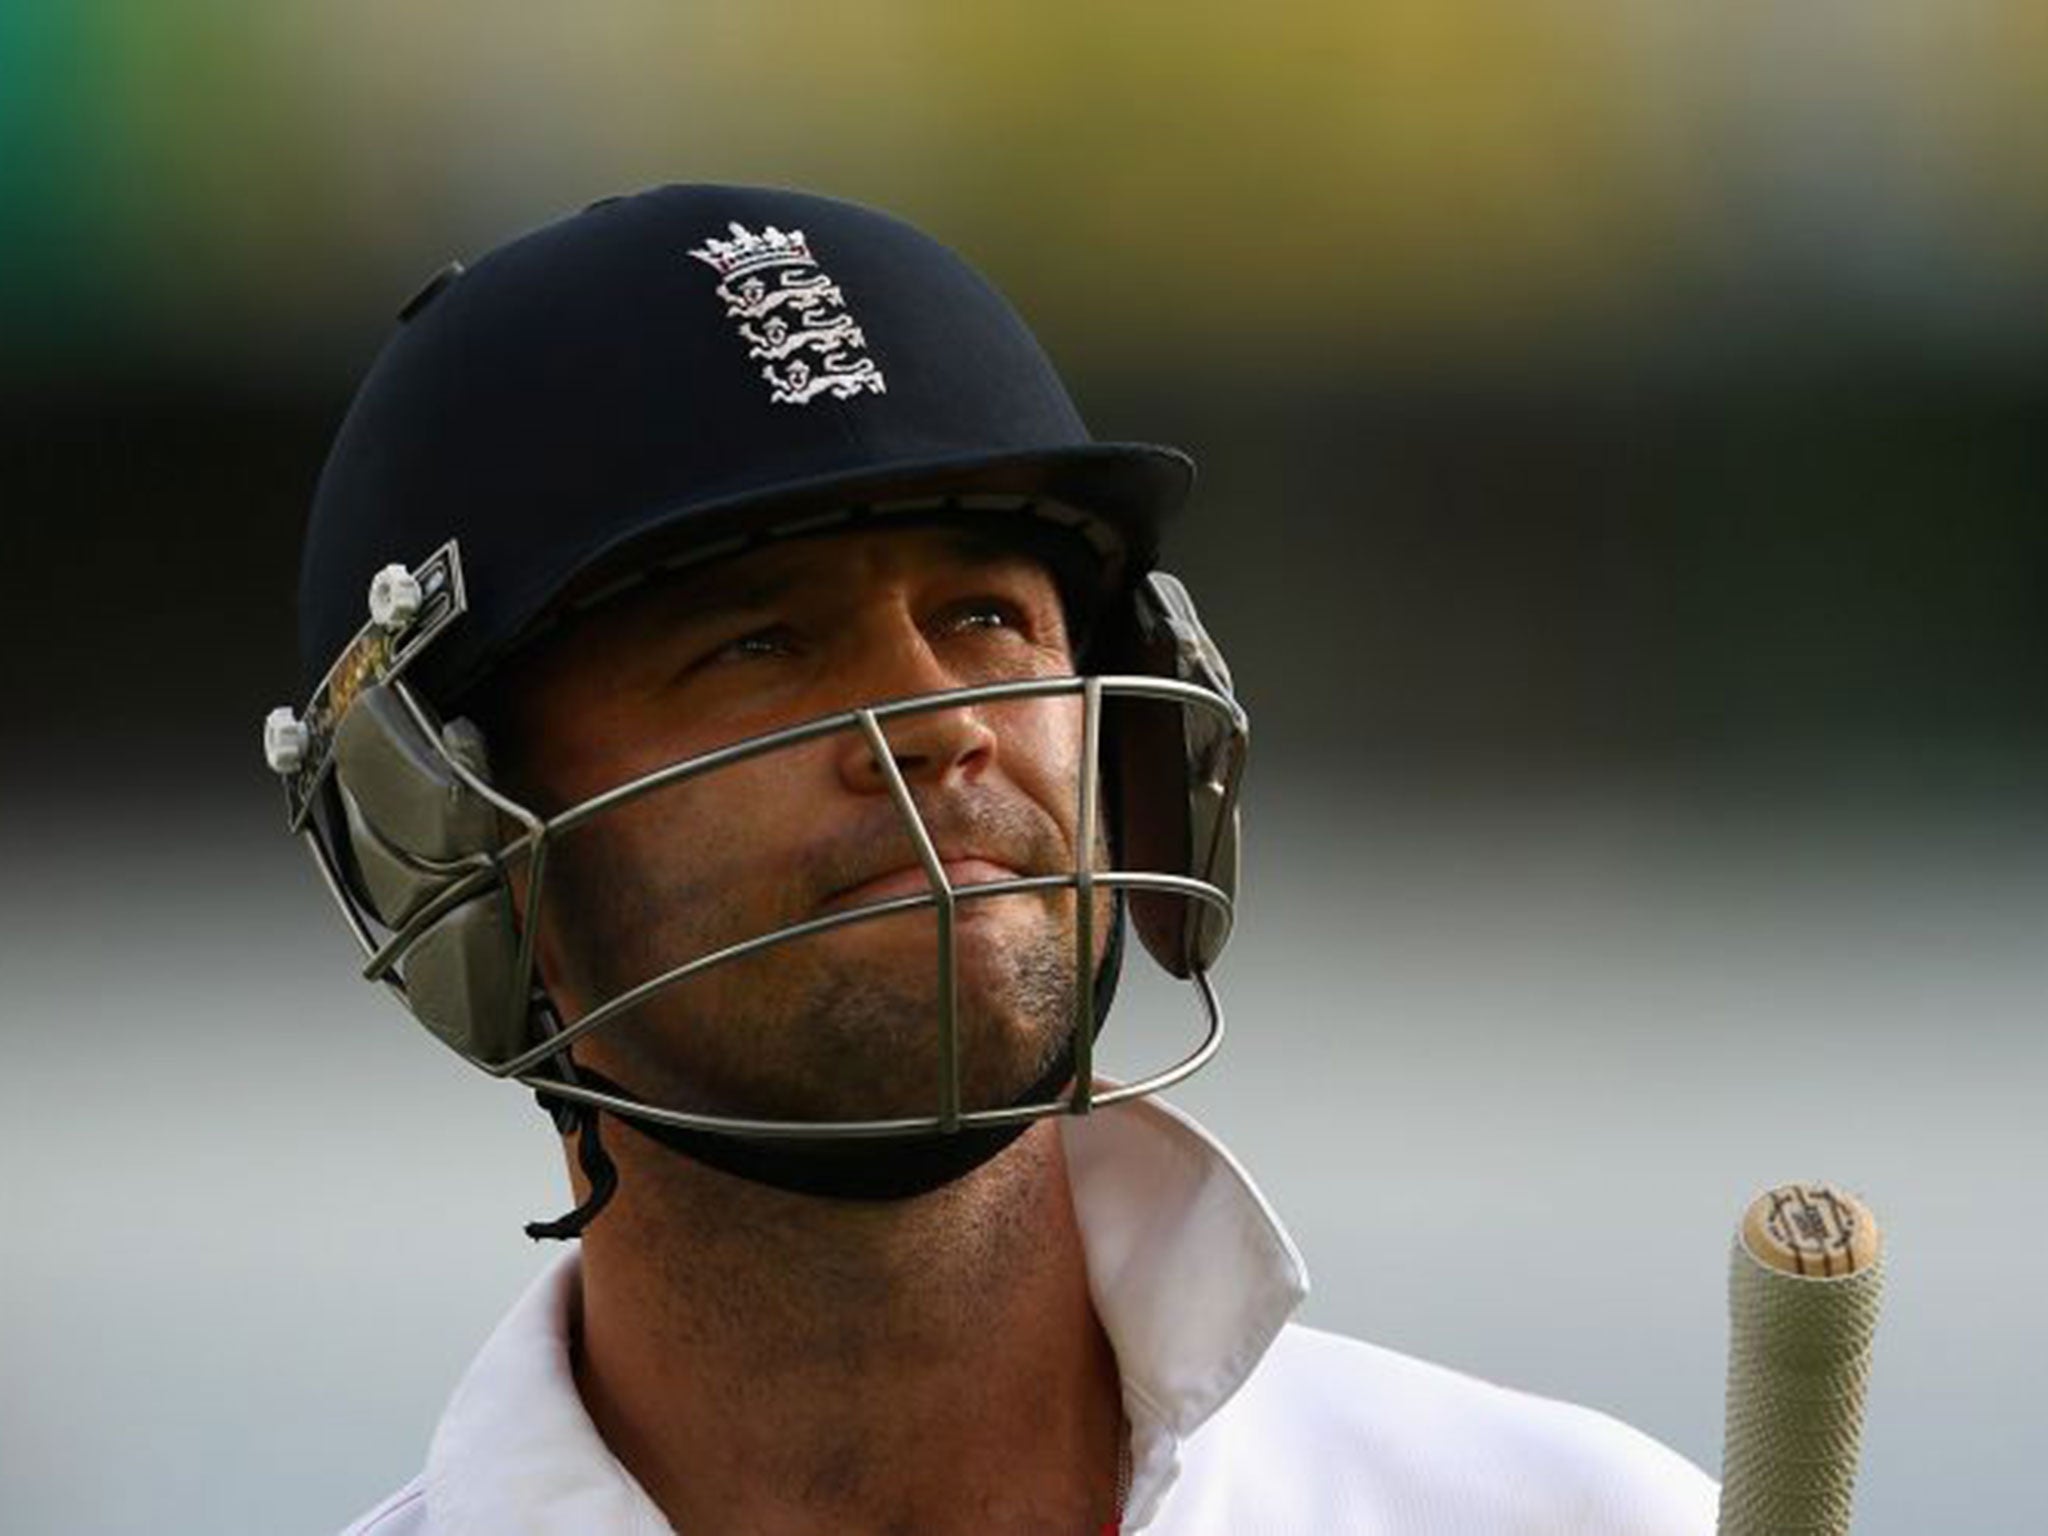 Jonathan Trott takes in his dismissal by Mitchell Johnson in the first Ashes Test last winter